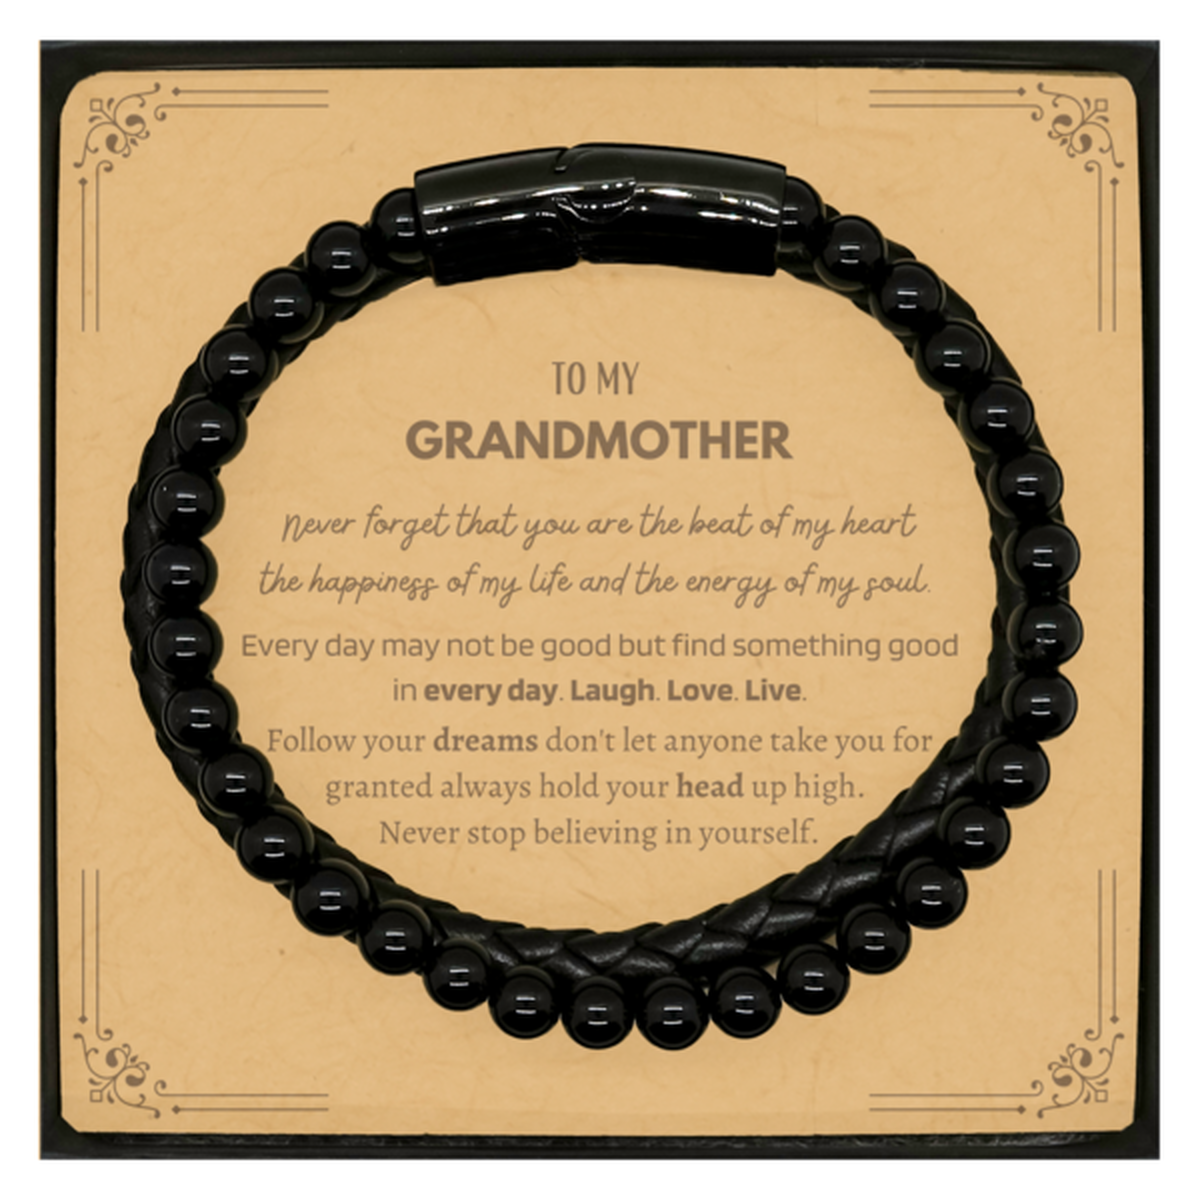 To My Grandmother Message Card Gifts, Christmas Grandmother Stone Leather Bracelets Present, Birthday Unique Motivational For Grandmother, To My Grandmother Never forget that you are the beat of my heart the happiness of my life and the energy of my soul